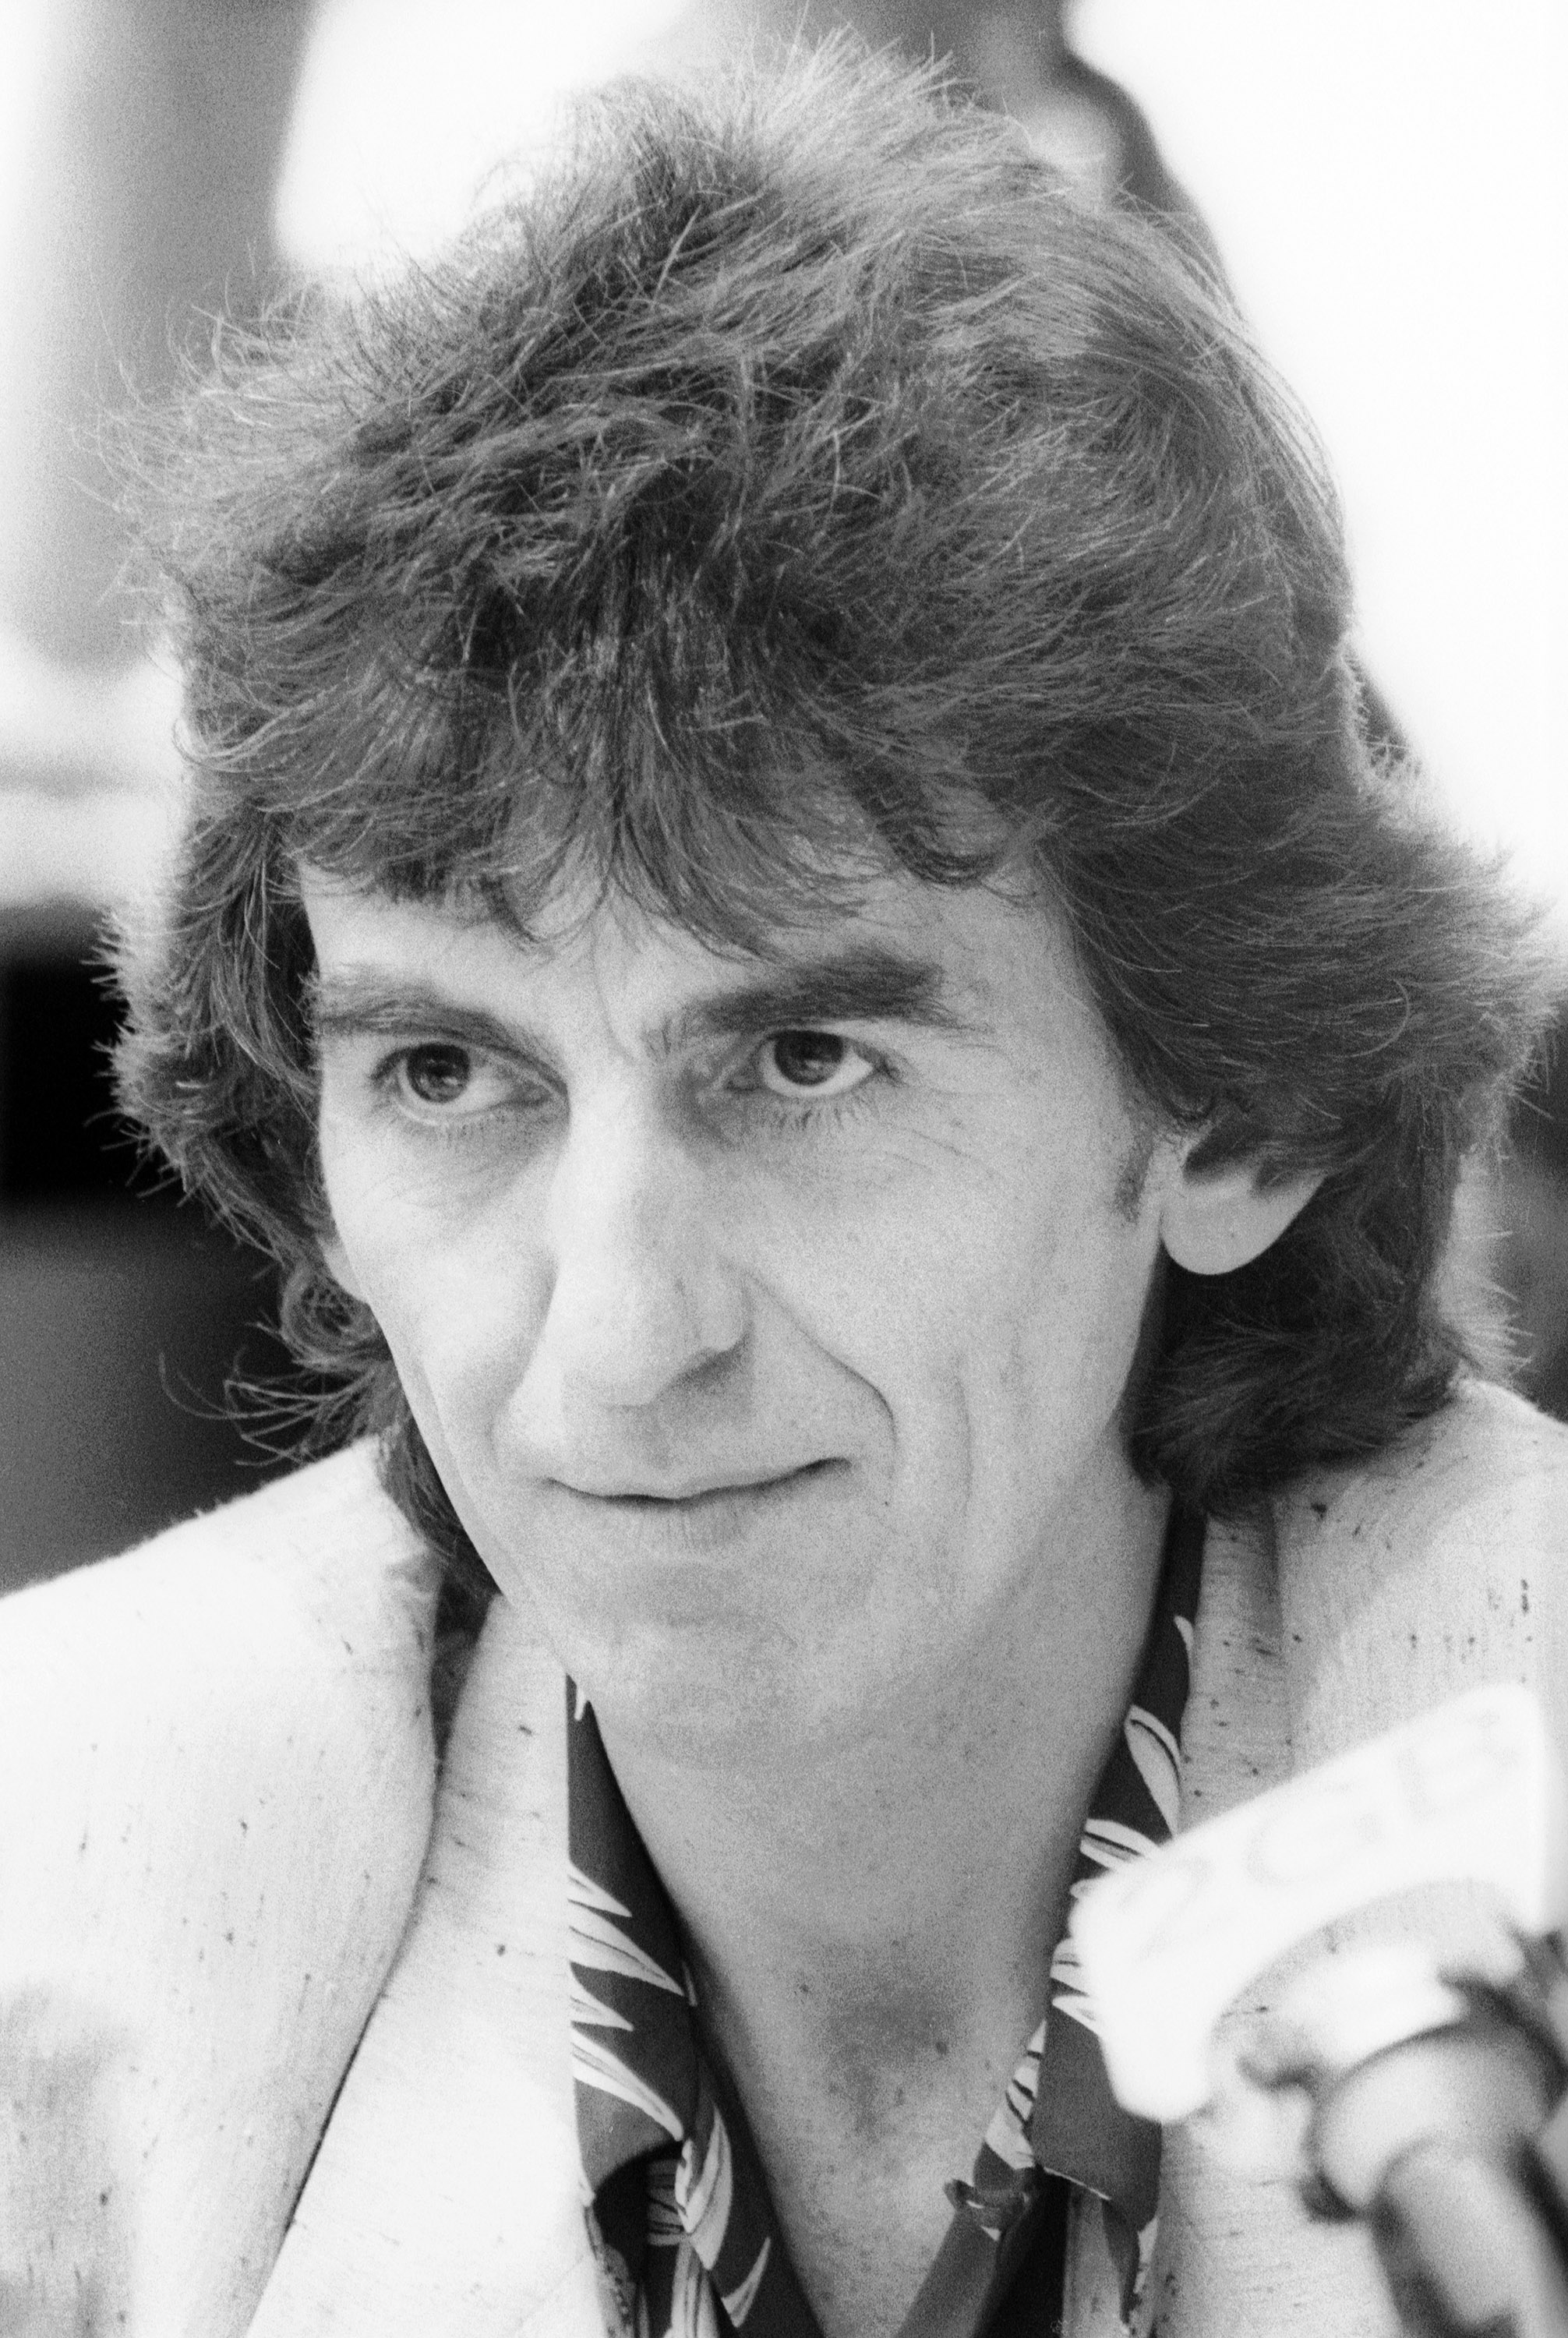 Musician and former member of 'The Beatles' George Harrison attends a press conference to launch the new book by Derek Taylor 'Fifty Years Adrift' at the Sydney Opera House on November 30, 1984 (Peter Carrette Archive&mdash;Getty Images)